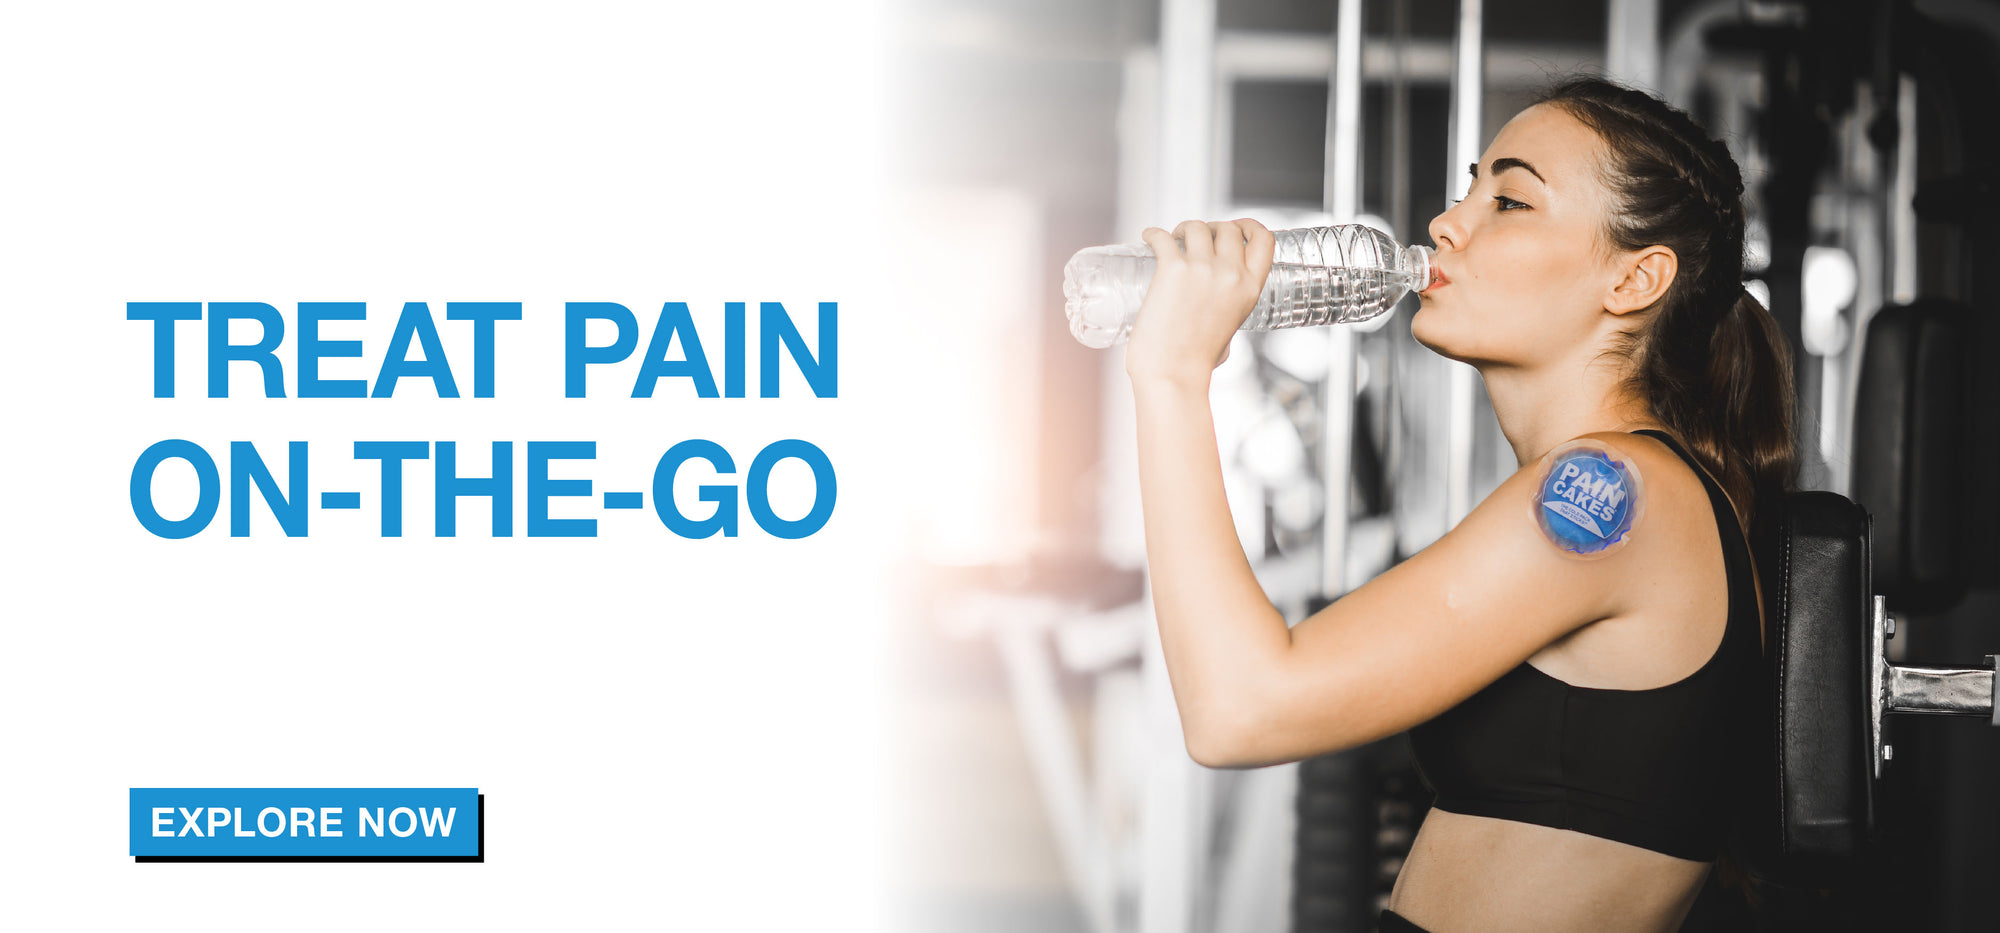 Fit woman in a gym drinking water with a 5" PainCake cold pack on her shoulder. Text, "TREAT PAIN ON-THE-GO. EXPLORE NOW."